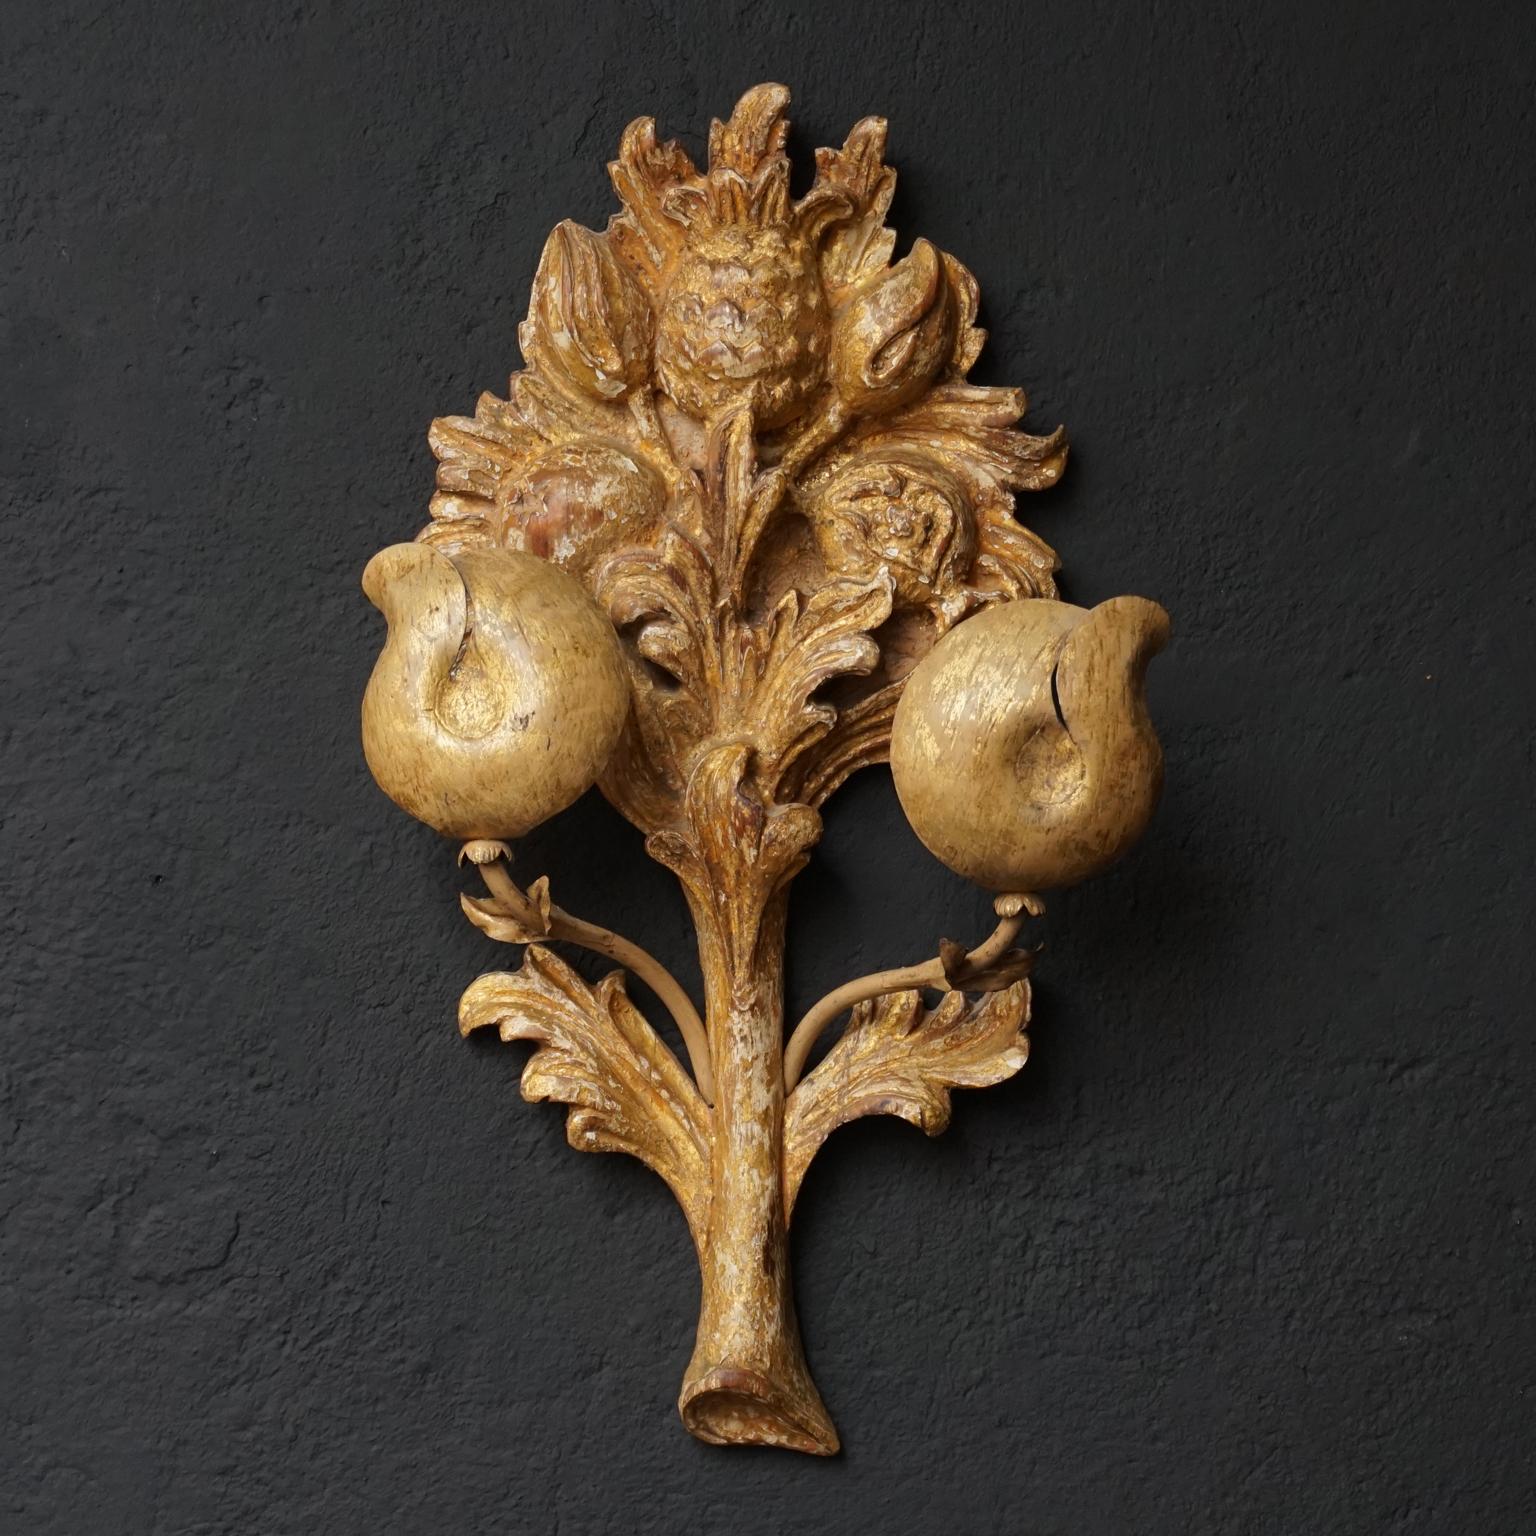 Hand-Painted 19th C. Set of Italian Carved Gilt Wood Wall Appliques with Flowers and Fruit